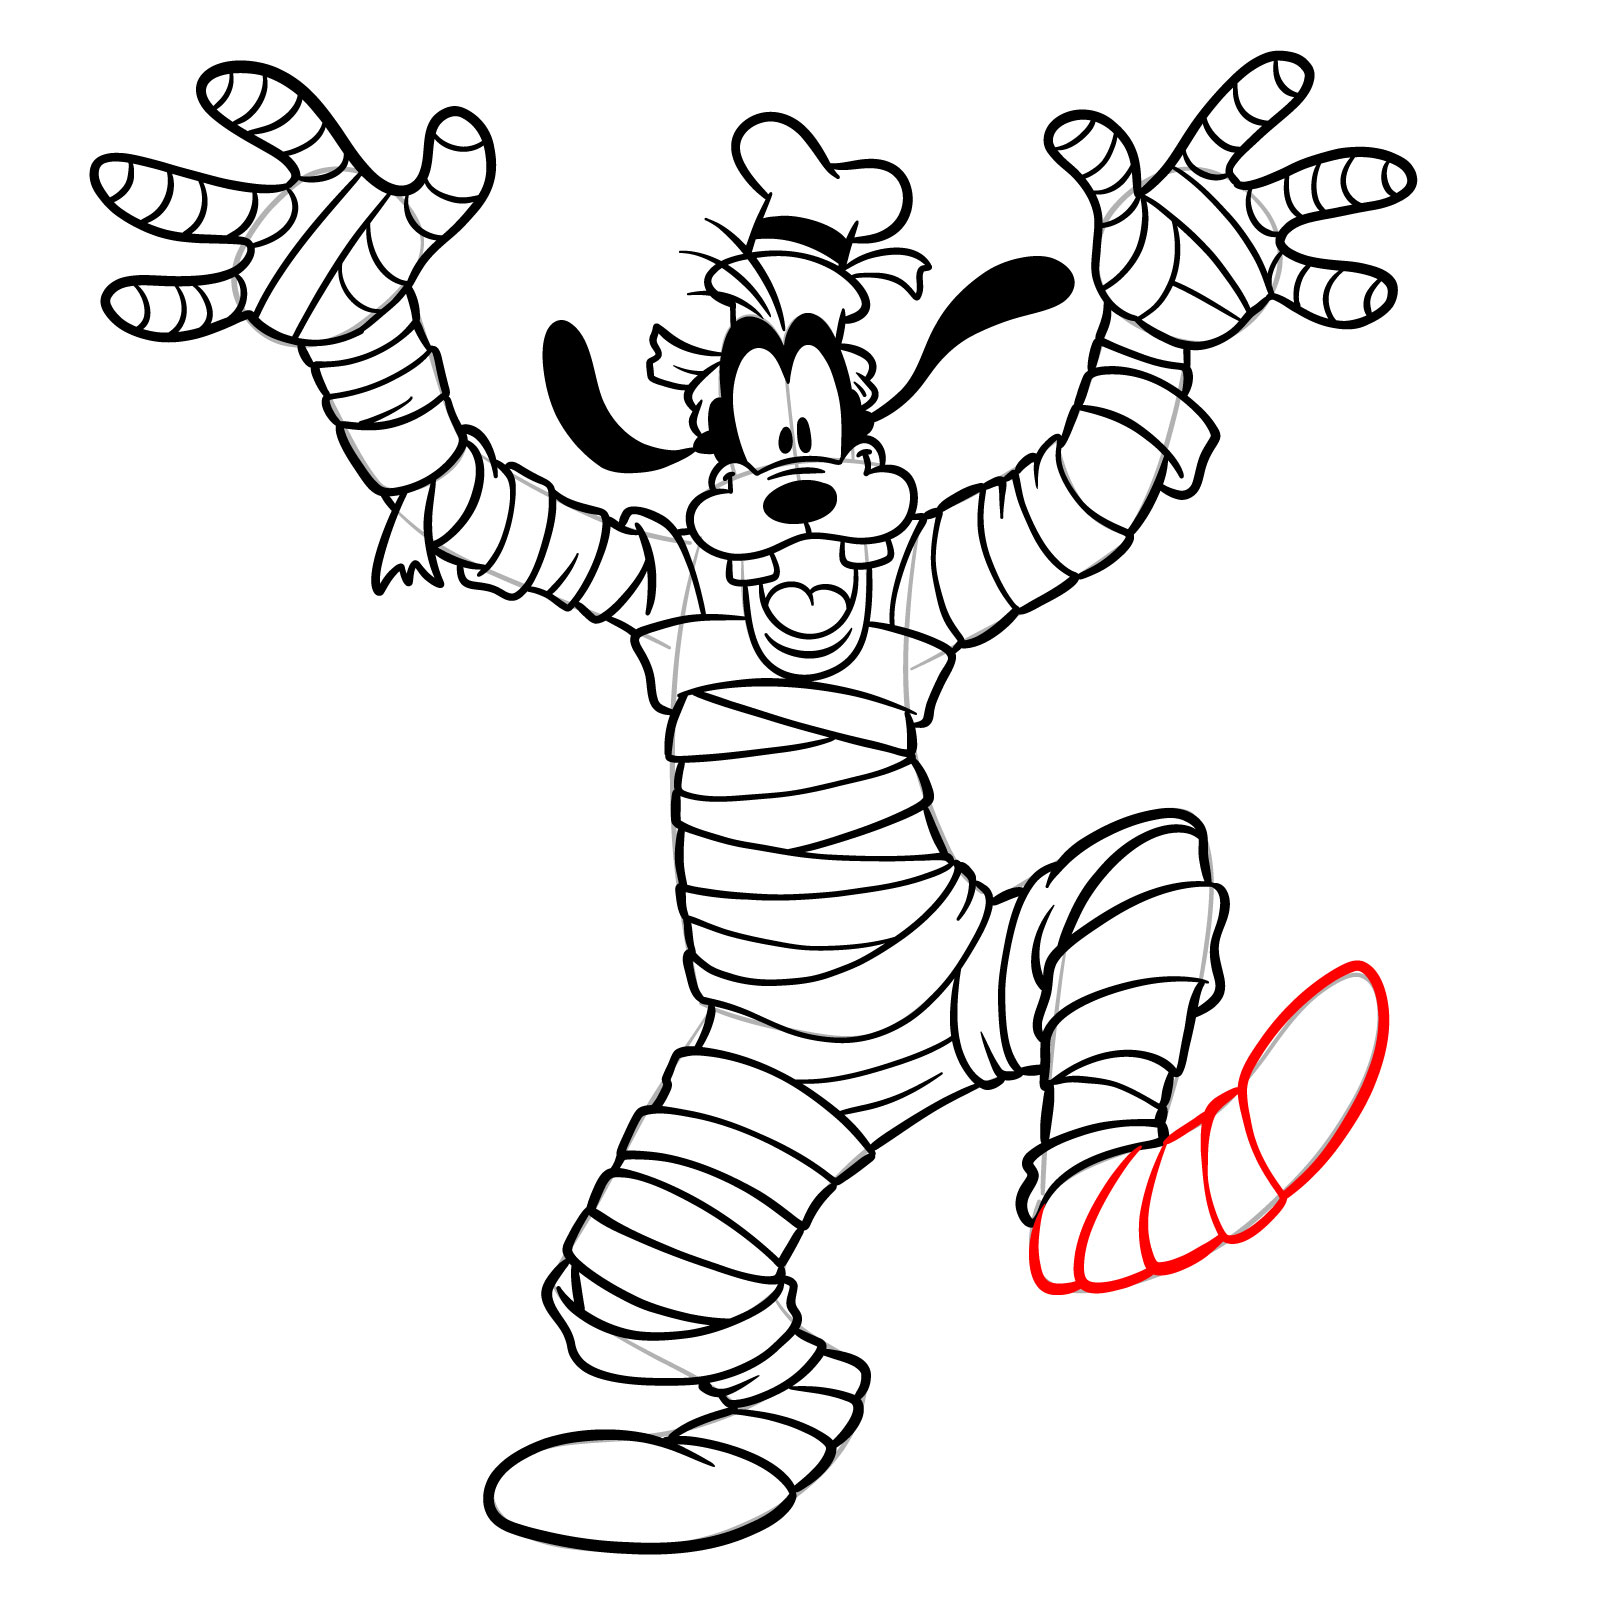 How to draw Halloween Goofy as a mummy - step 30